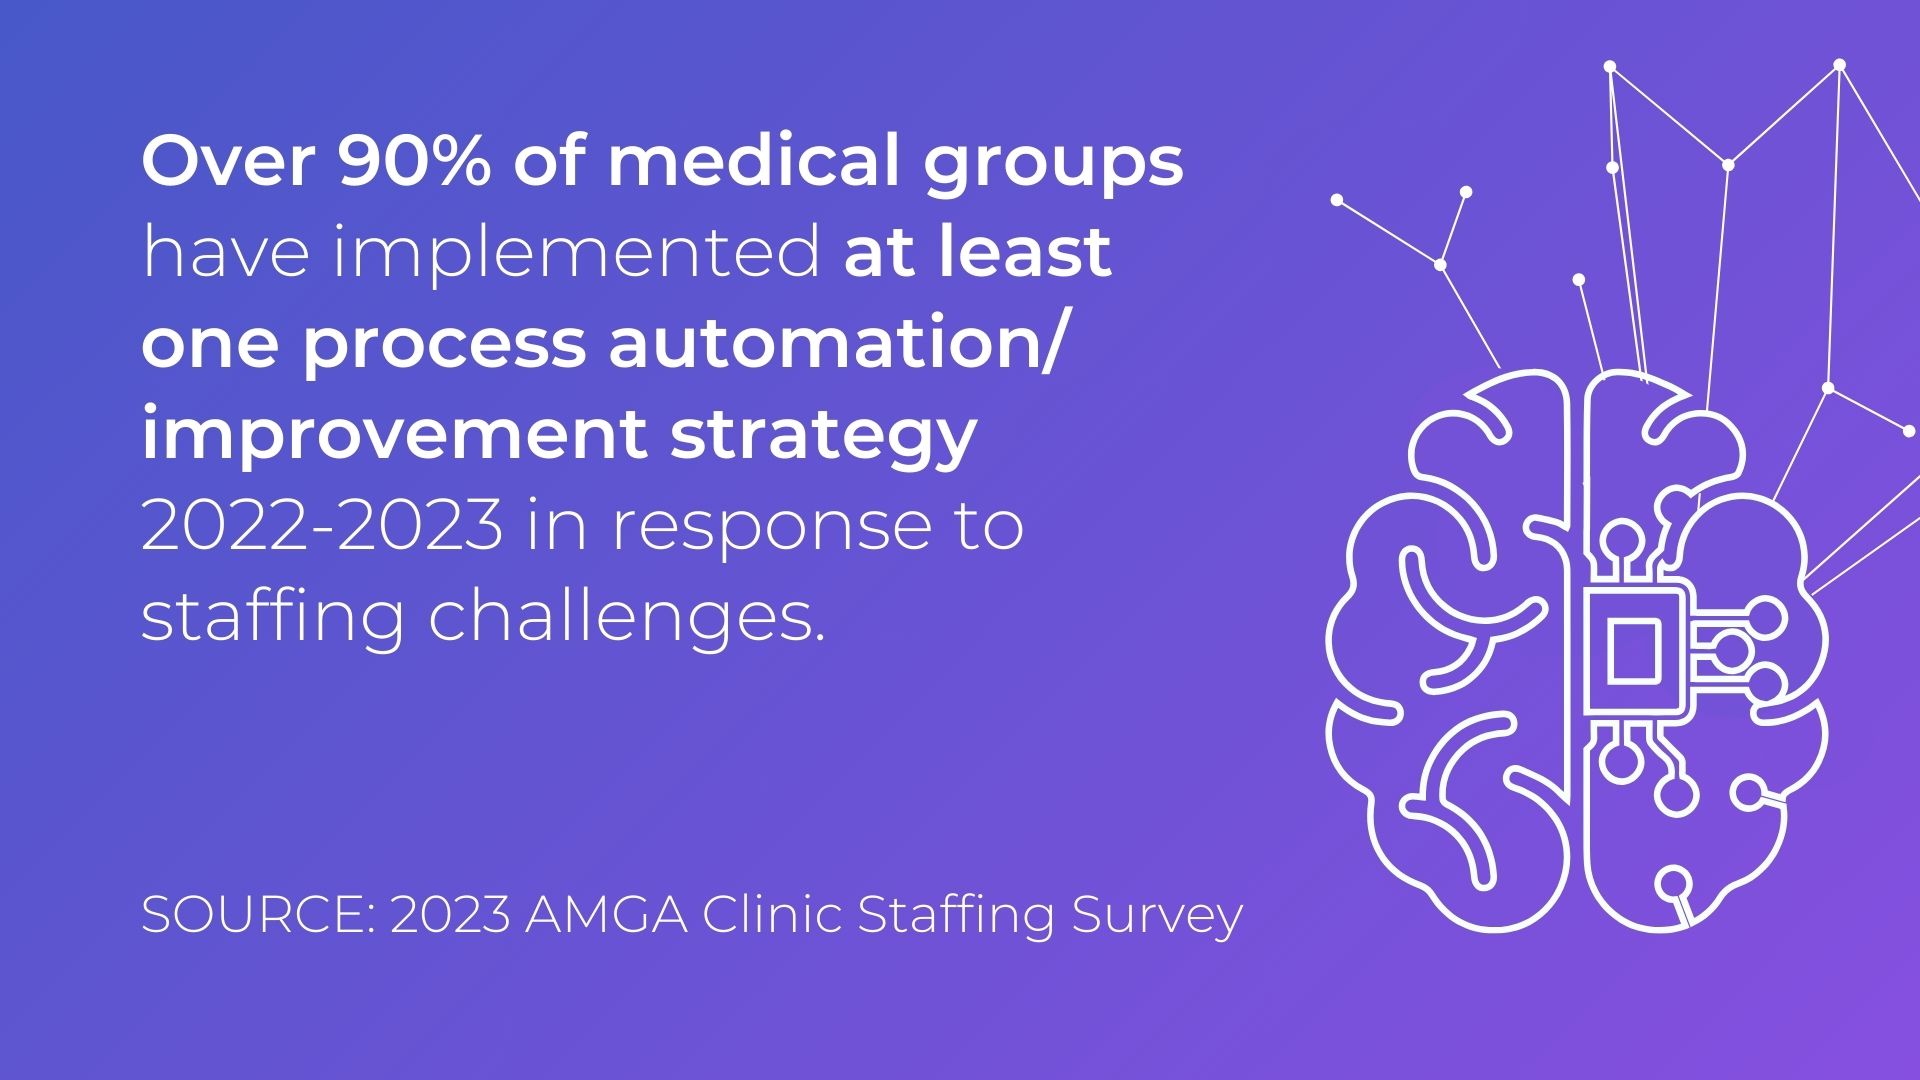 Over 90% of medical groups have implemented at least one process improvement or automation strategy